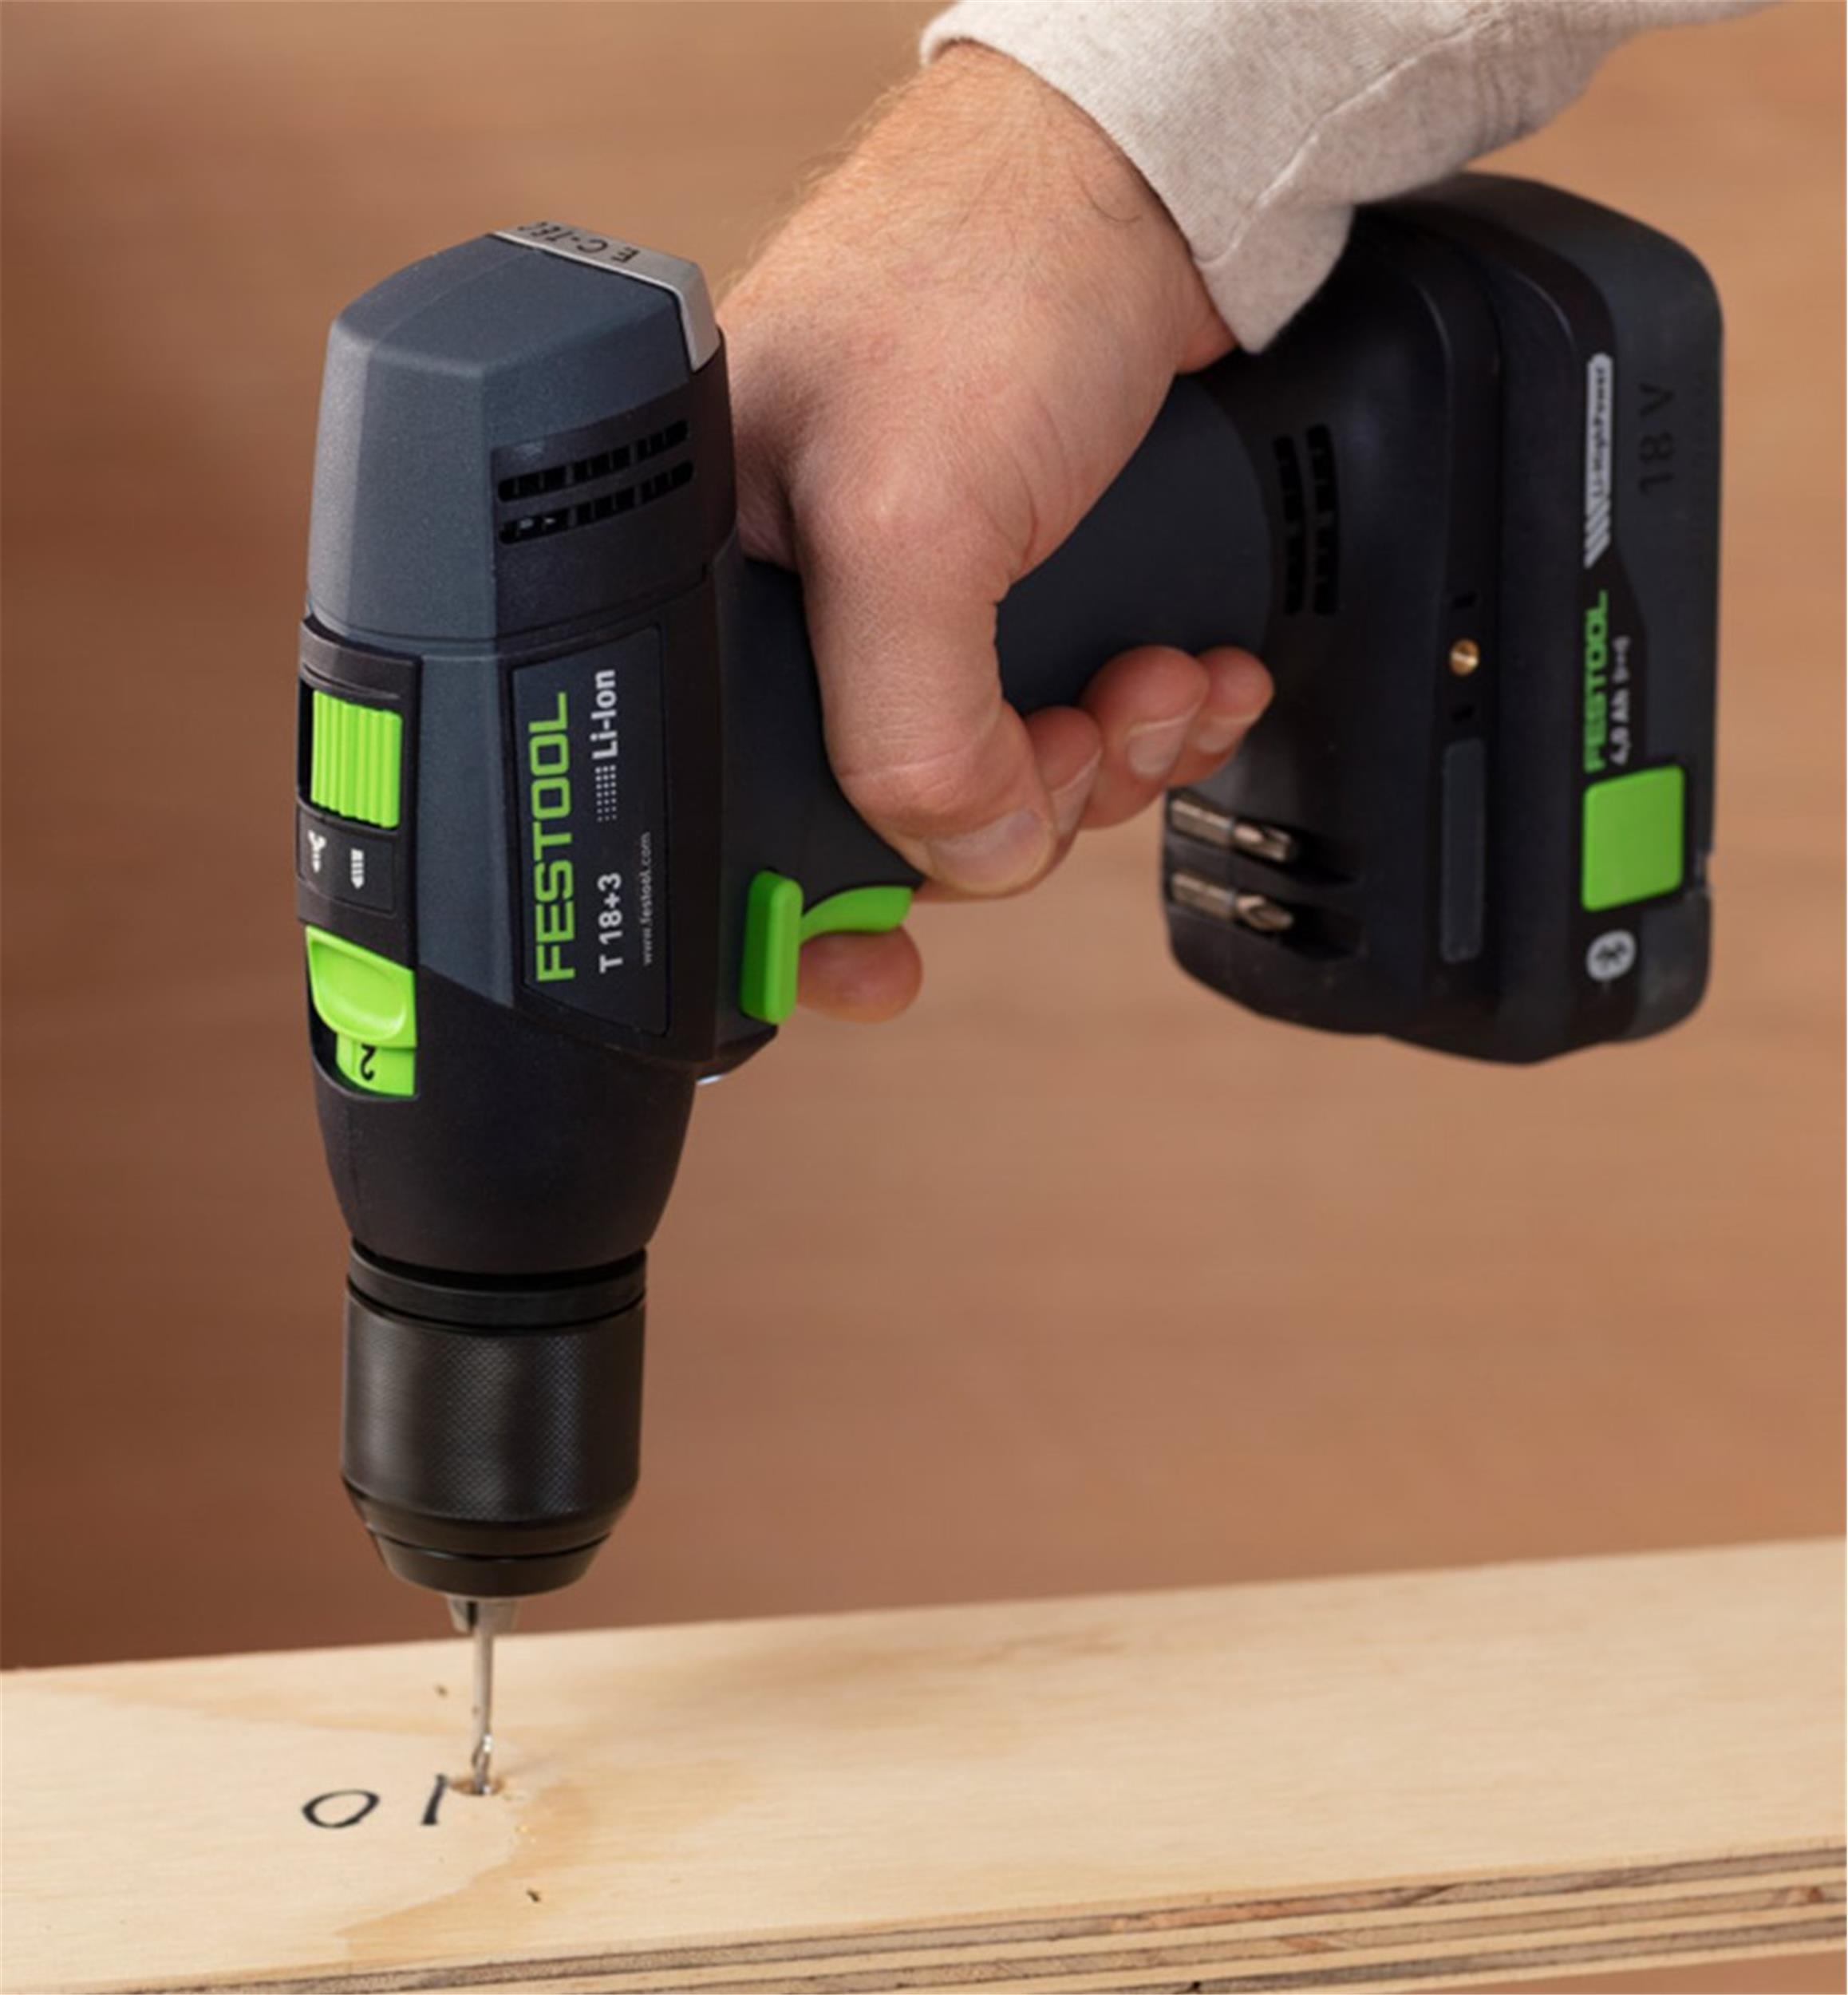 An operator used the Festool T 18 Easy set to speed 2 to drill a 1/8" hole in a piece of 3/4" thick plywood.